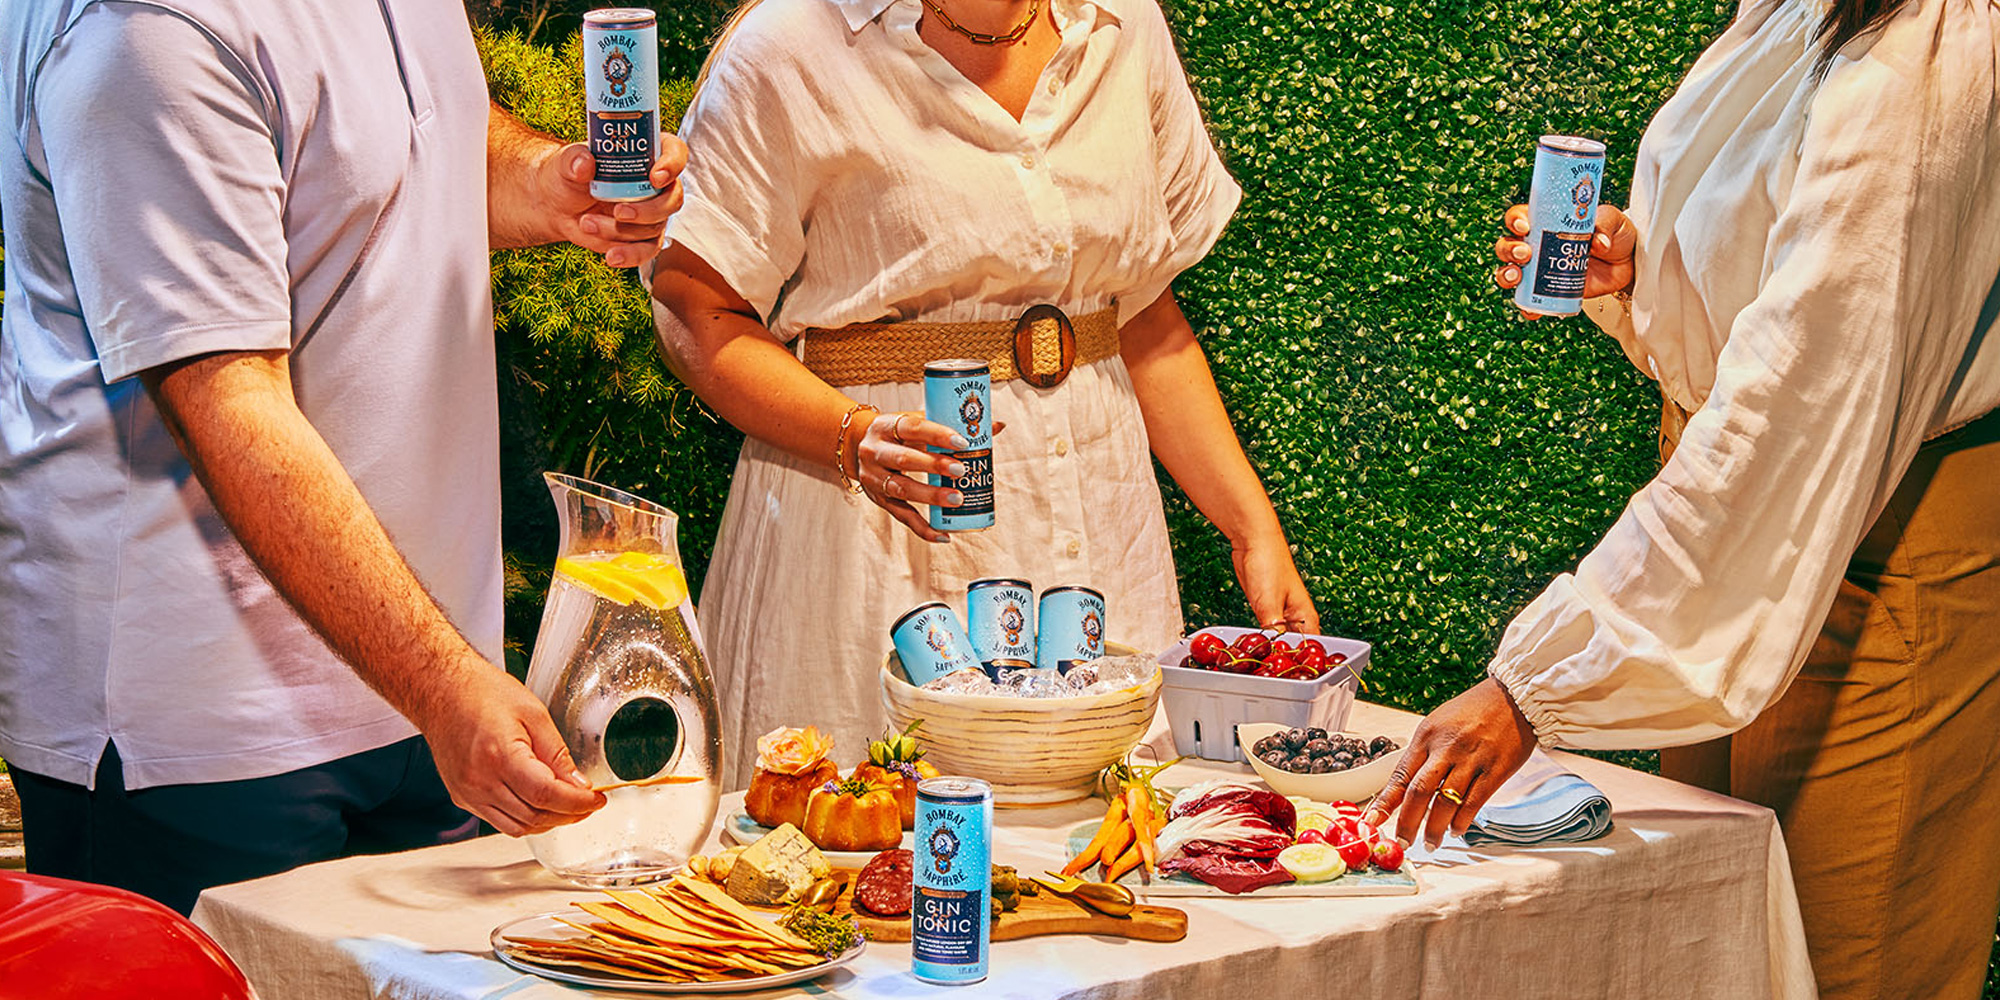 Sips of Summer: At the Cookout with Bombay Sapphire Gin & Tonic Canned Cocktails